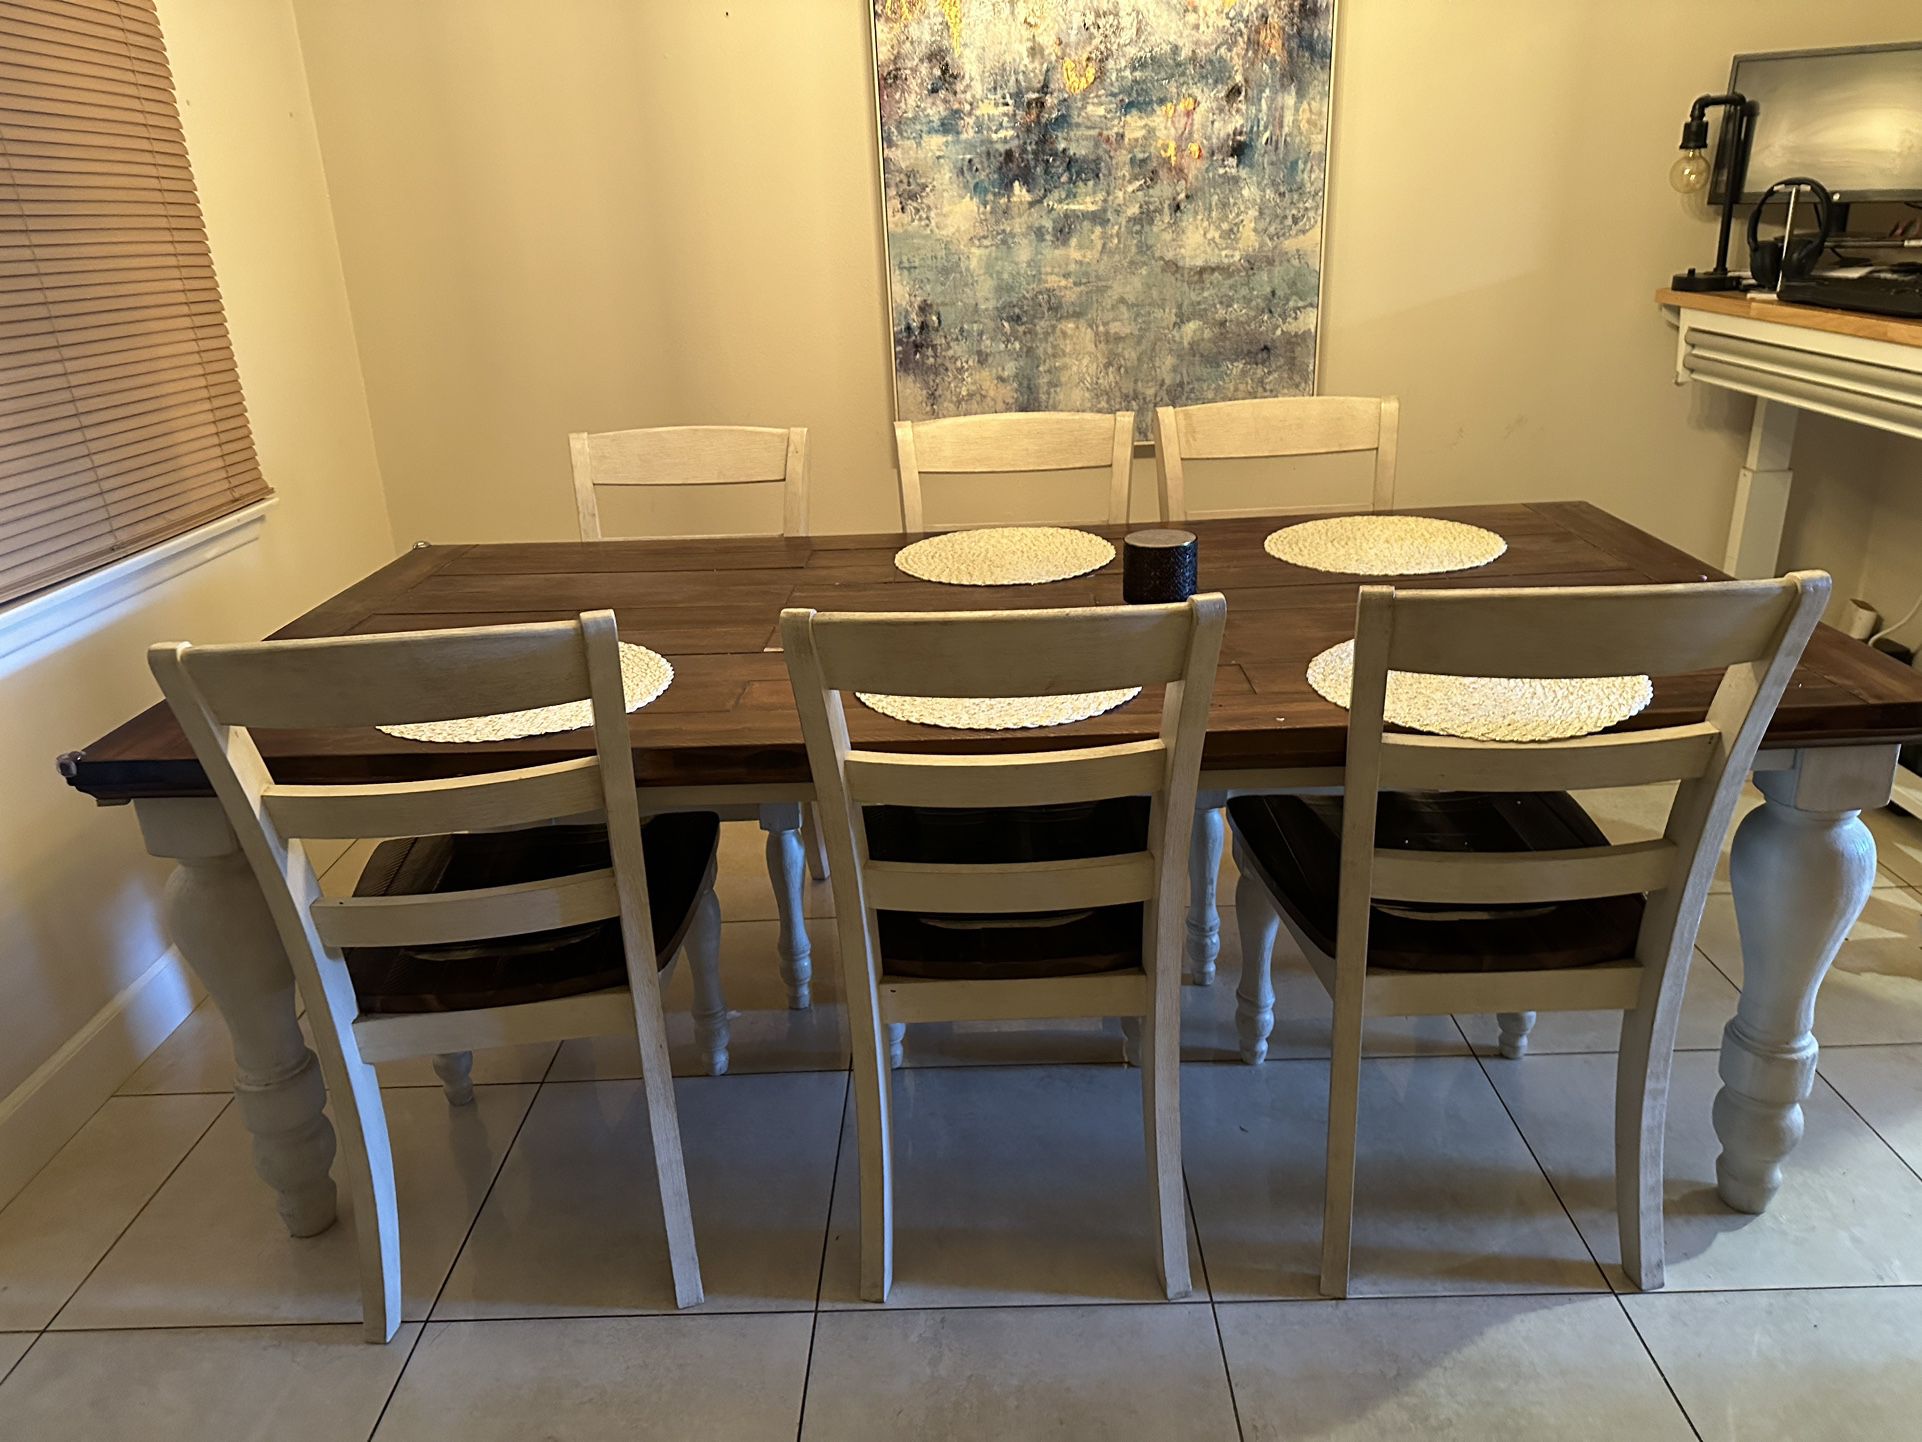 Large Rectangular Wooden Table For 6 